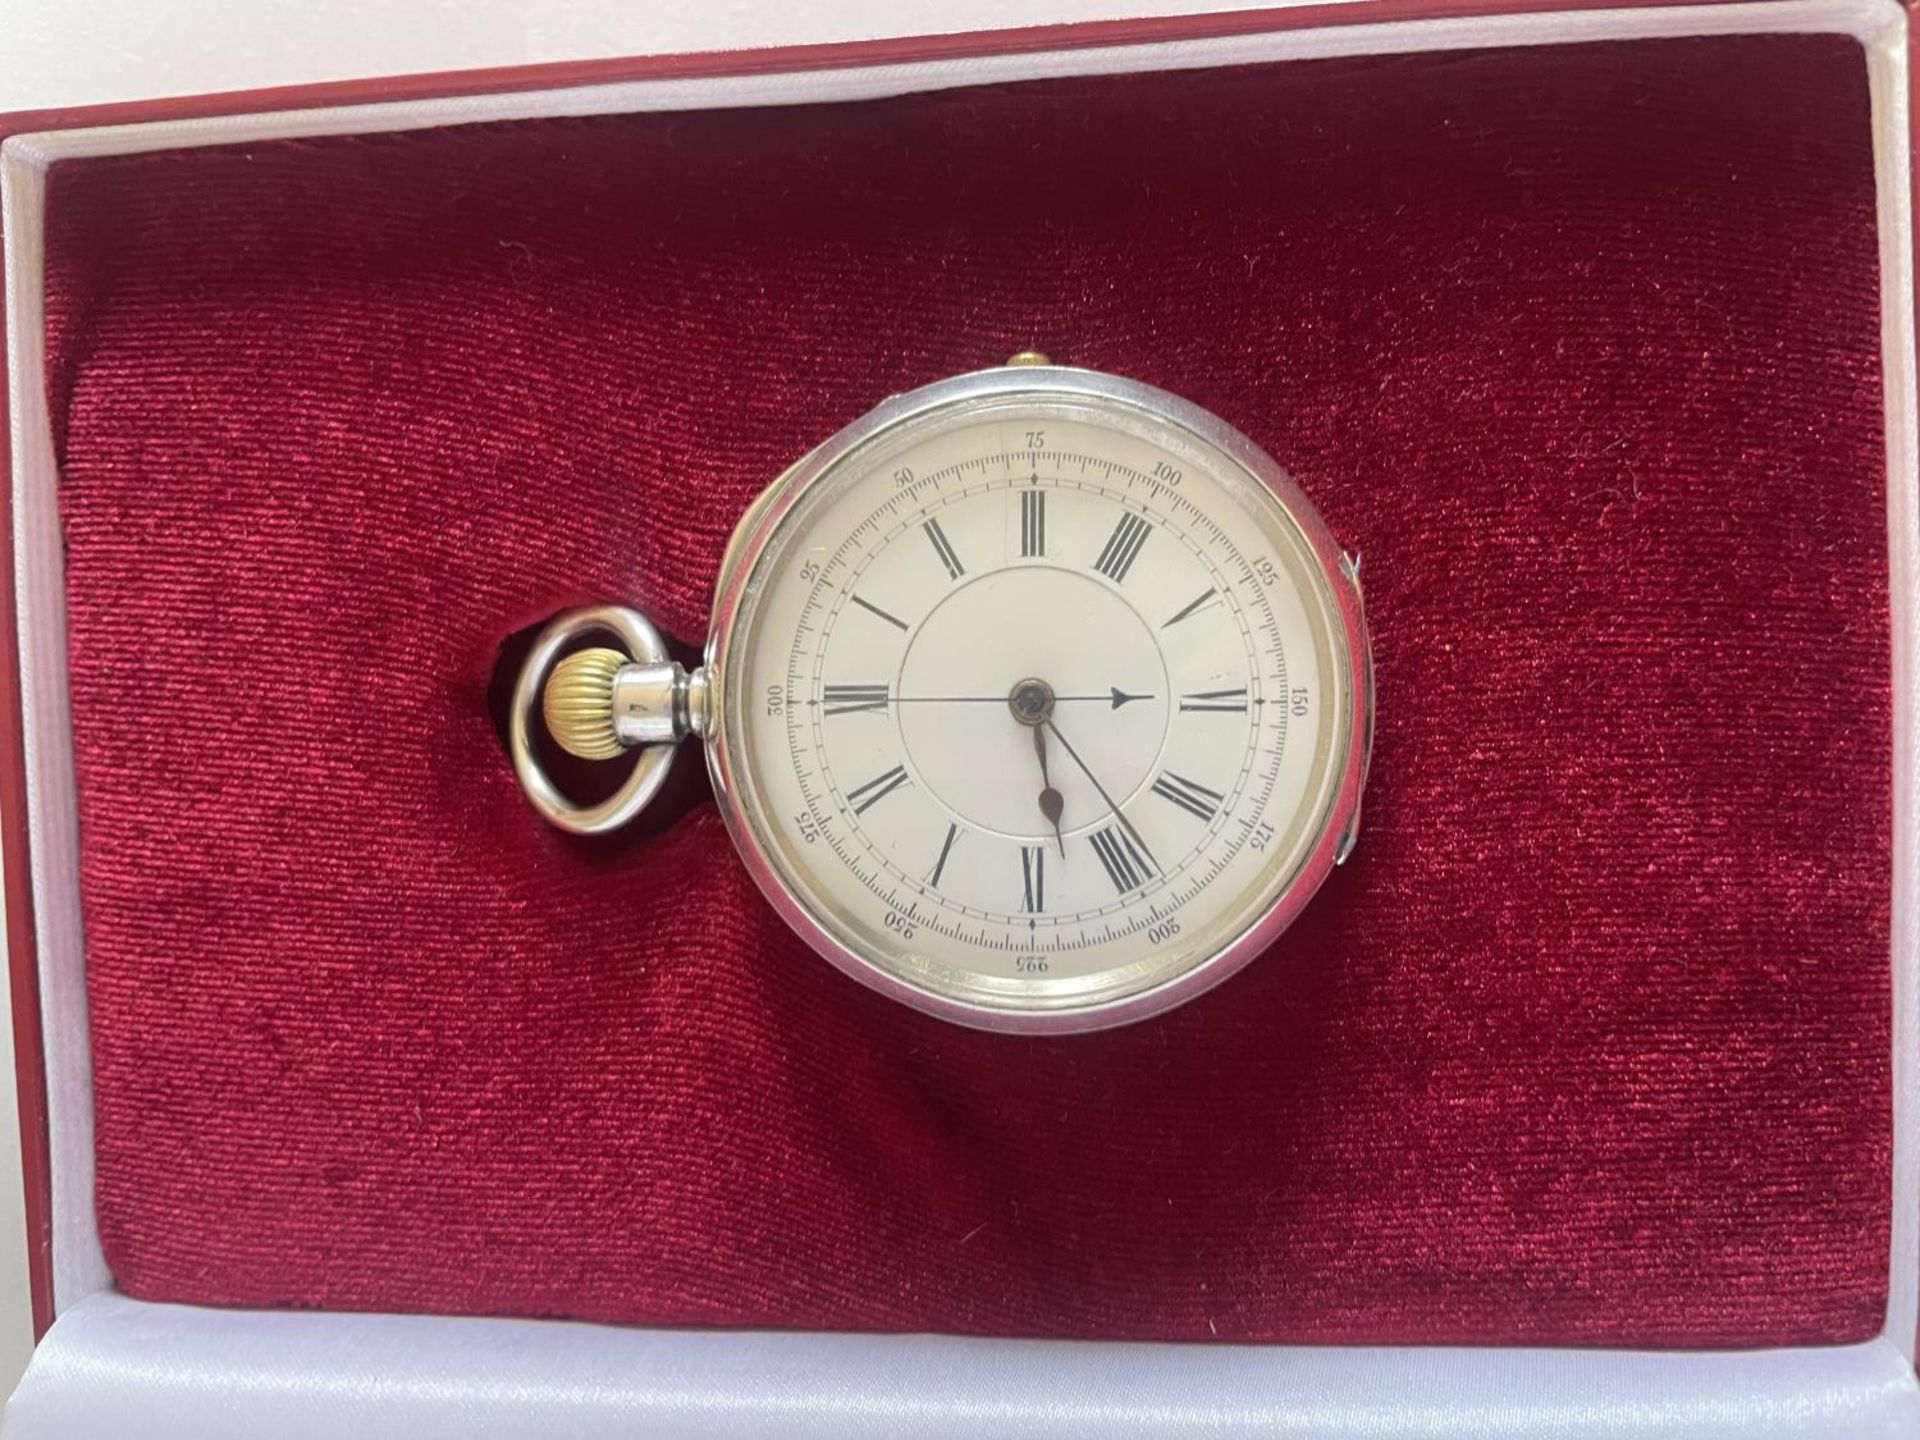 A RARE SILVER CHRONOGRAPH POCKET WATCH WITH WHITE FACE AND ROMAN NUMERALS IN ORIGINAL PRESENTATION - Image 2 of 3